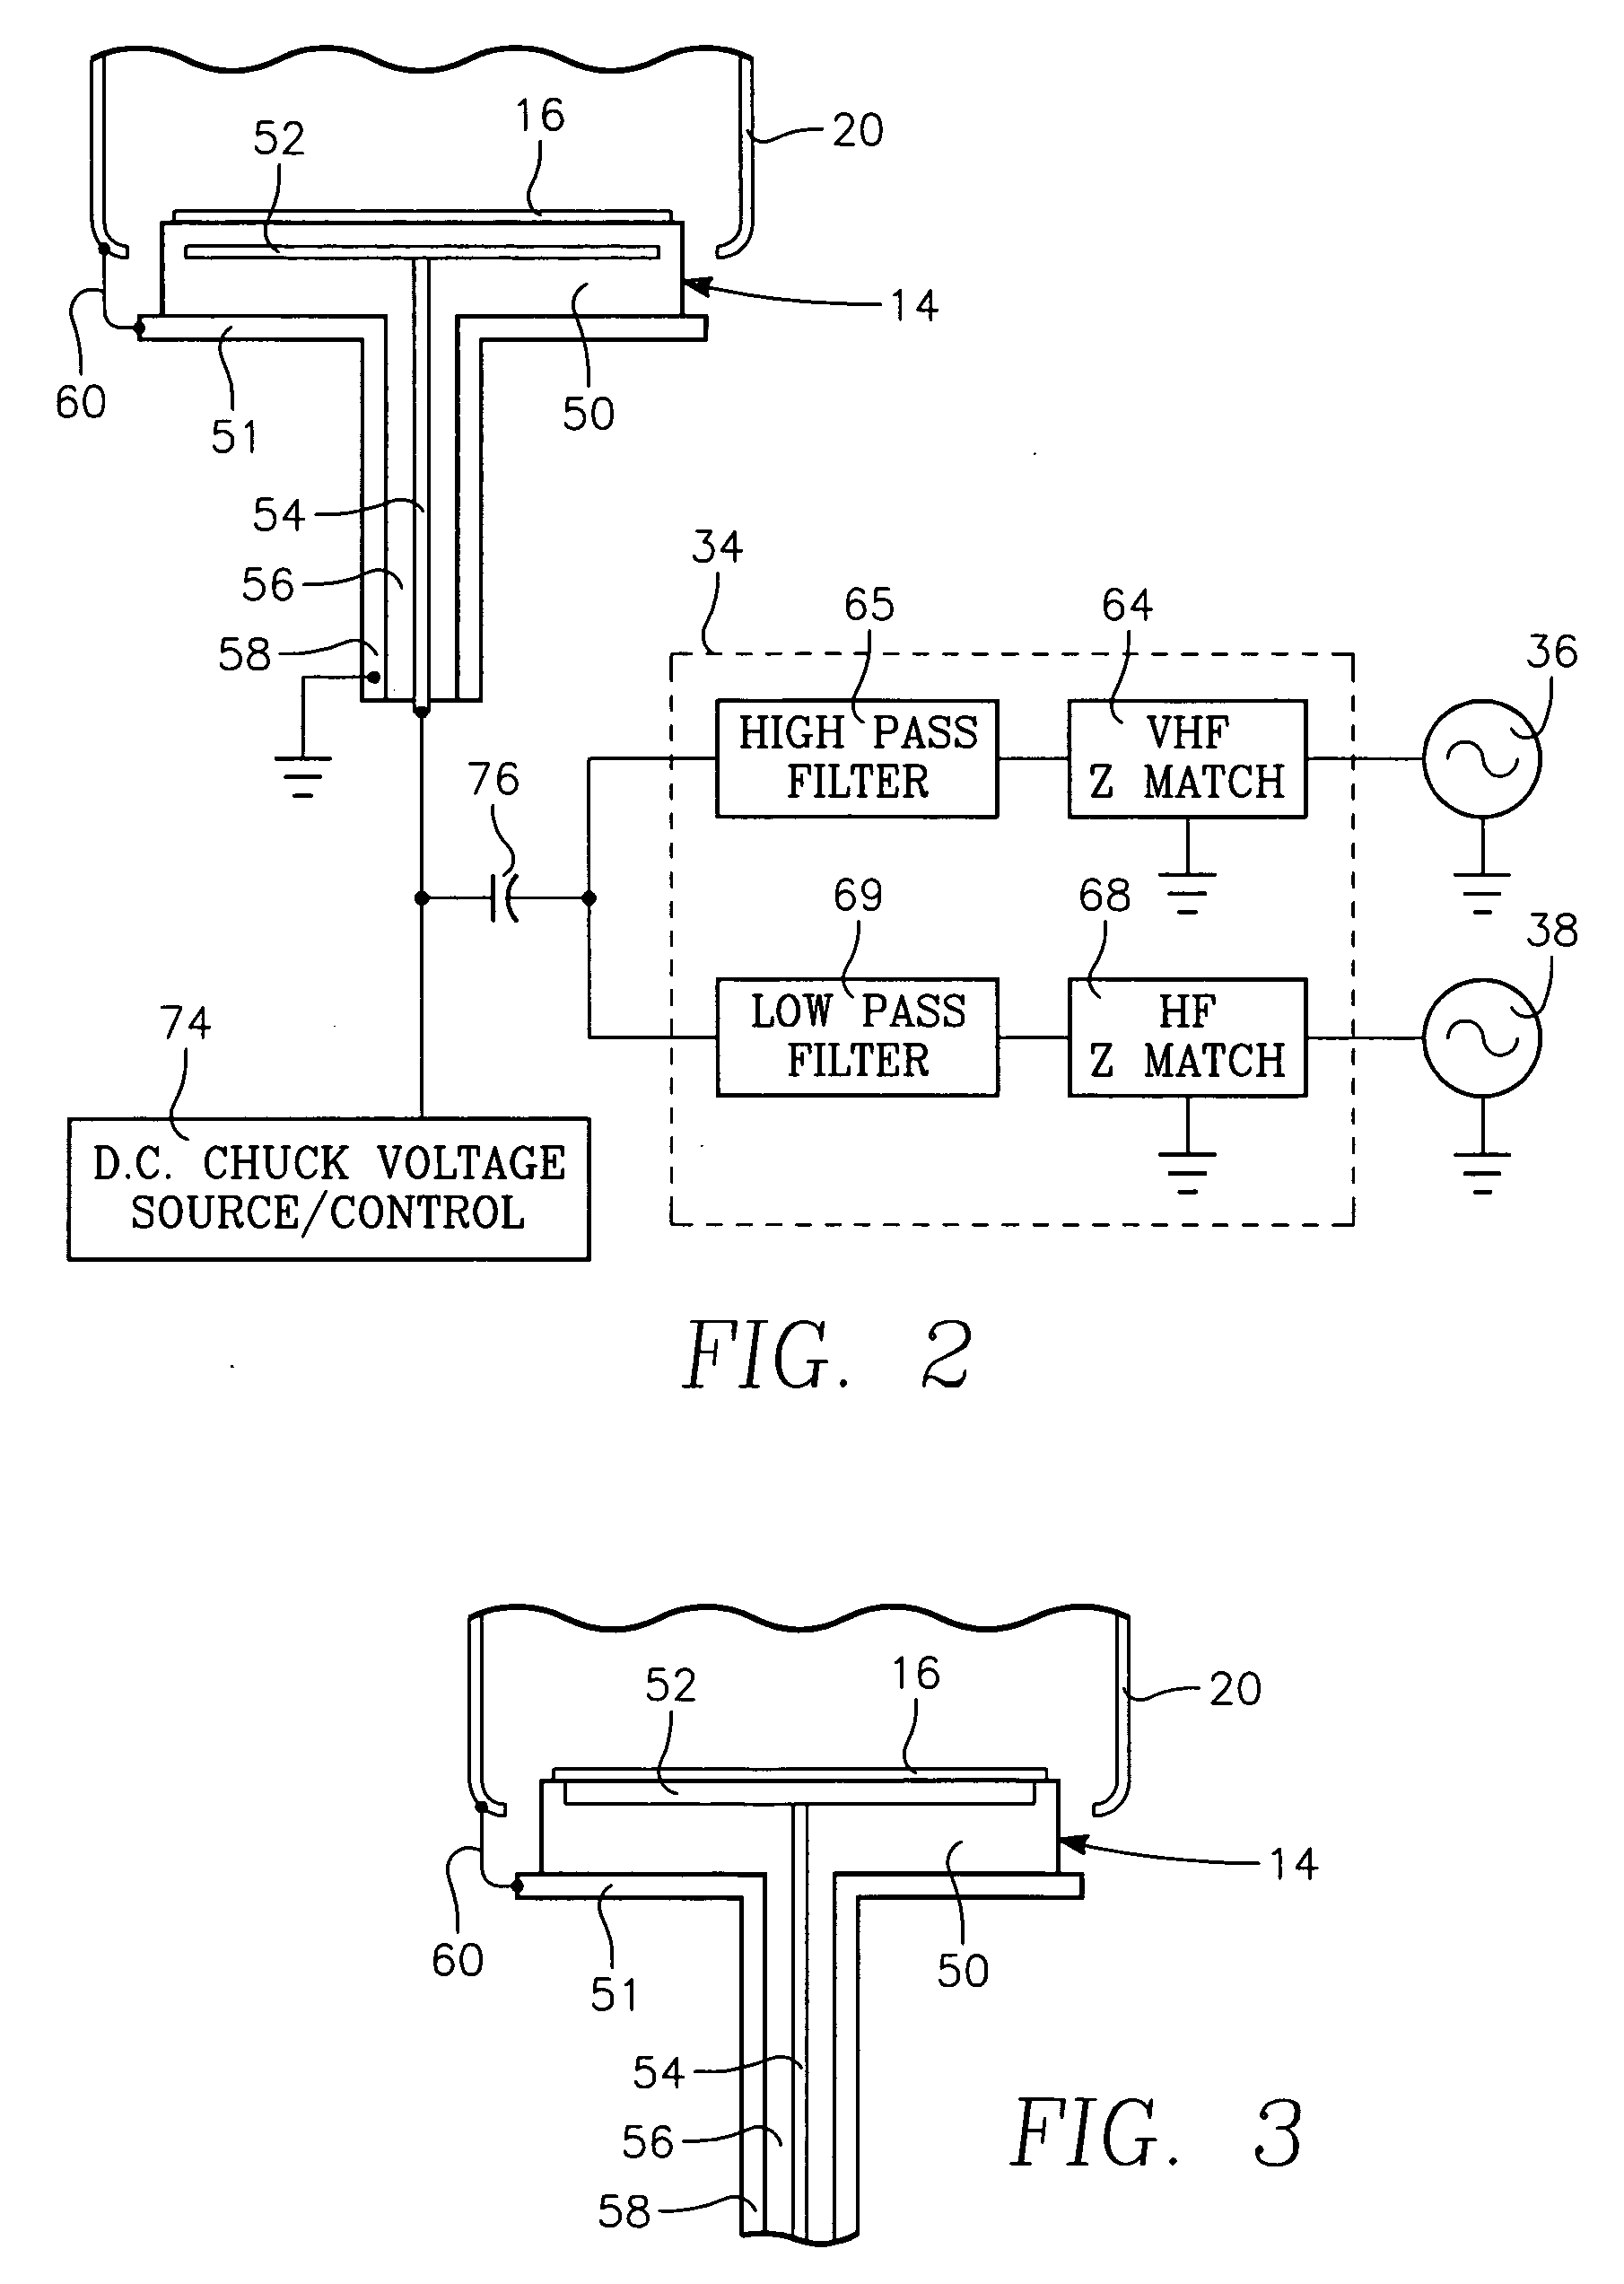 Method of performing physical vapor deposition with RF plasma source power applied to the target using a magnetron